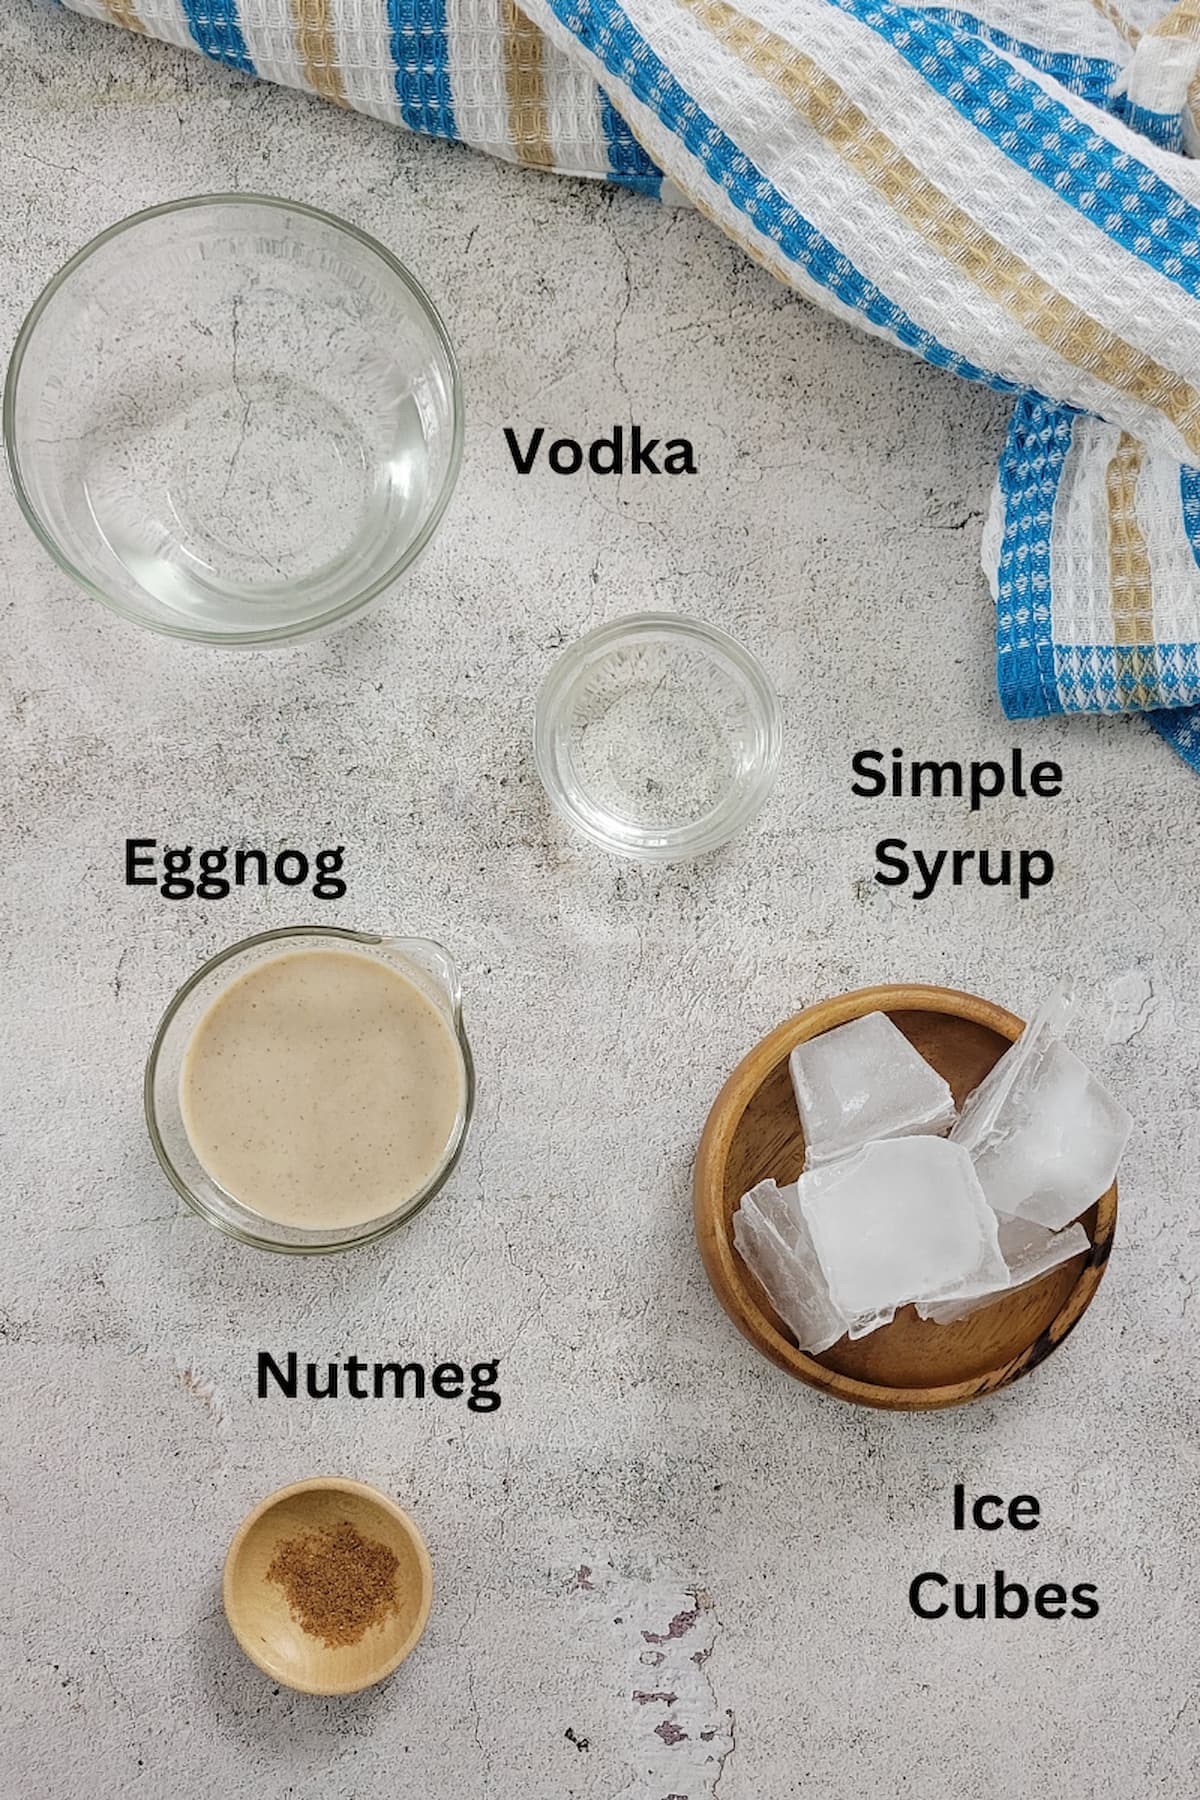 ingredients to make a martini with eggnog - vodka, eggnog, simple syrup, ice cubes, nutmeg